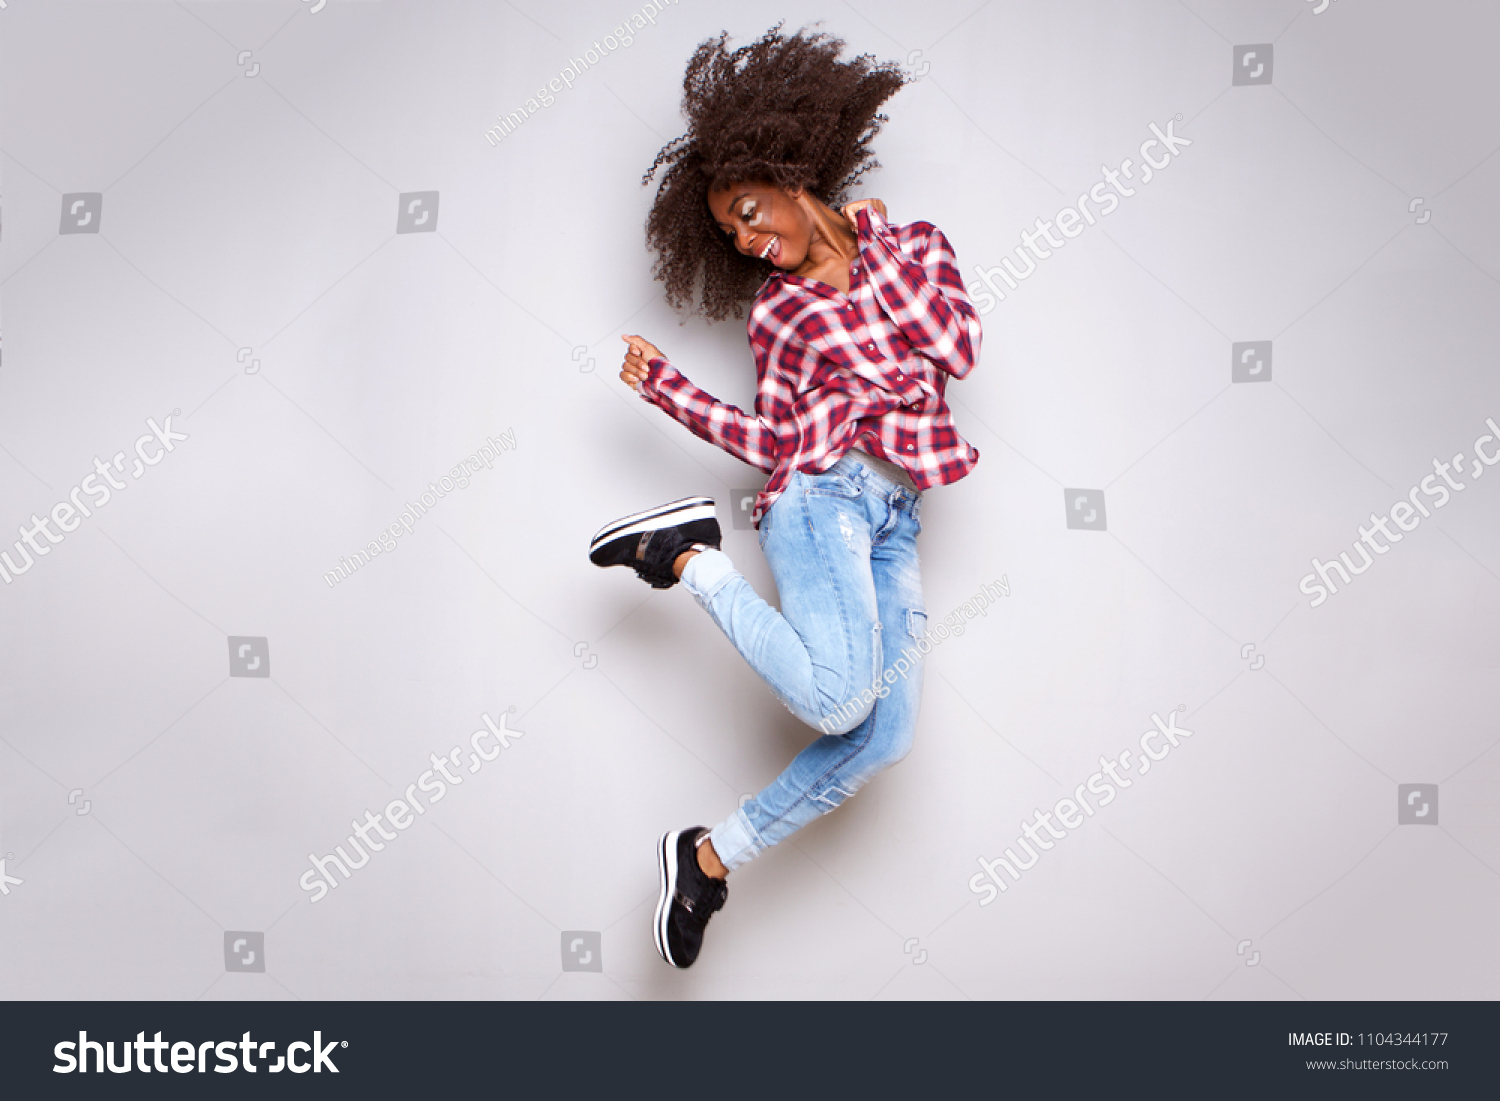 Full body portrait of cheerful young african woman jumping in air over white background #1104344177